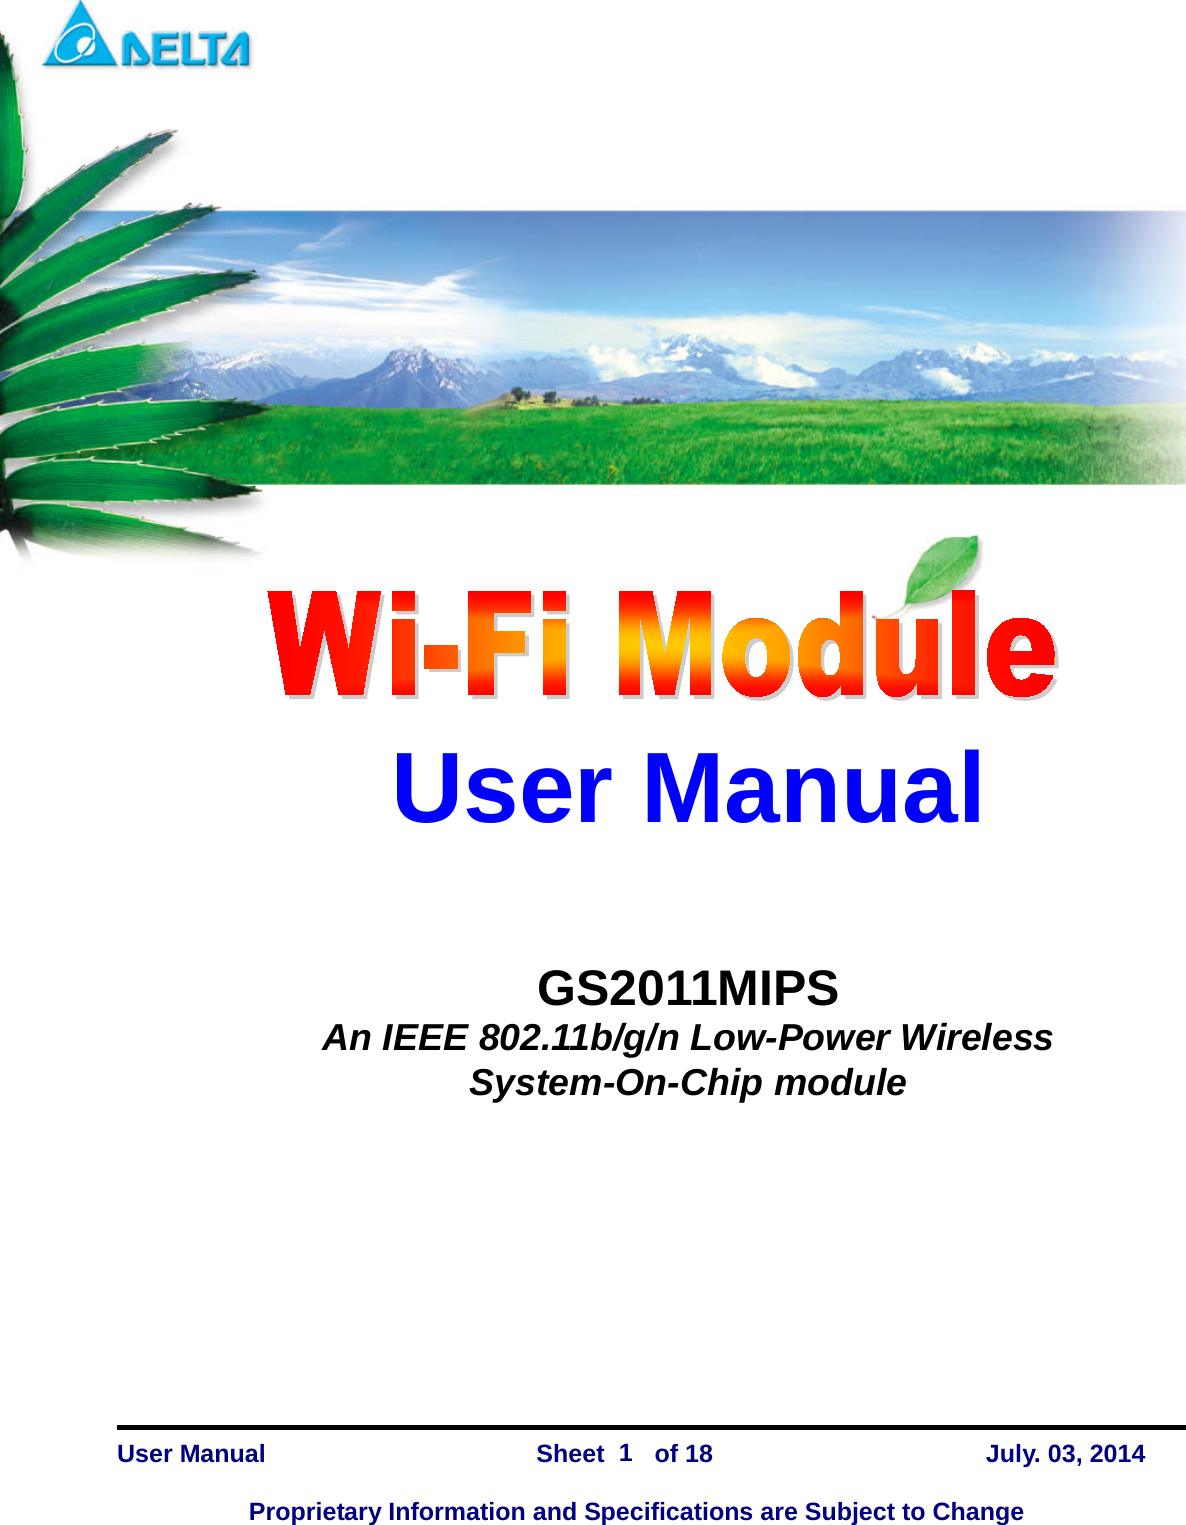     GS2011MIPS   User Manual   GS2011MIPS An IEEE 802.11b/g/n Low-Power Wireless System-On-Chip module   User Manual                Sheet    of 18      July. 03, 2014  Proprietary Information and Specifications are Subject to Change 1 